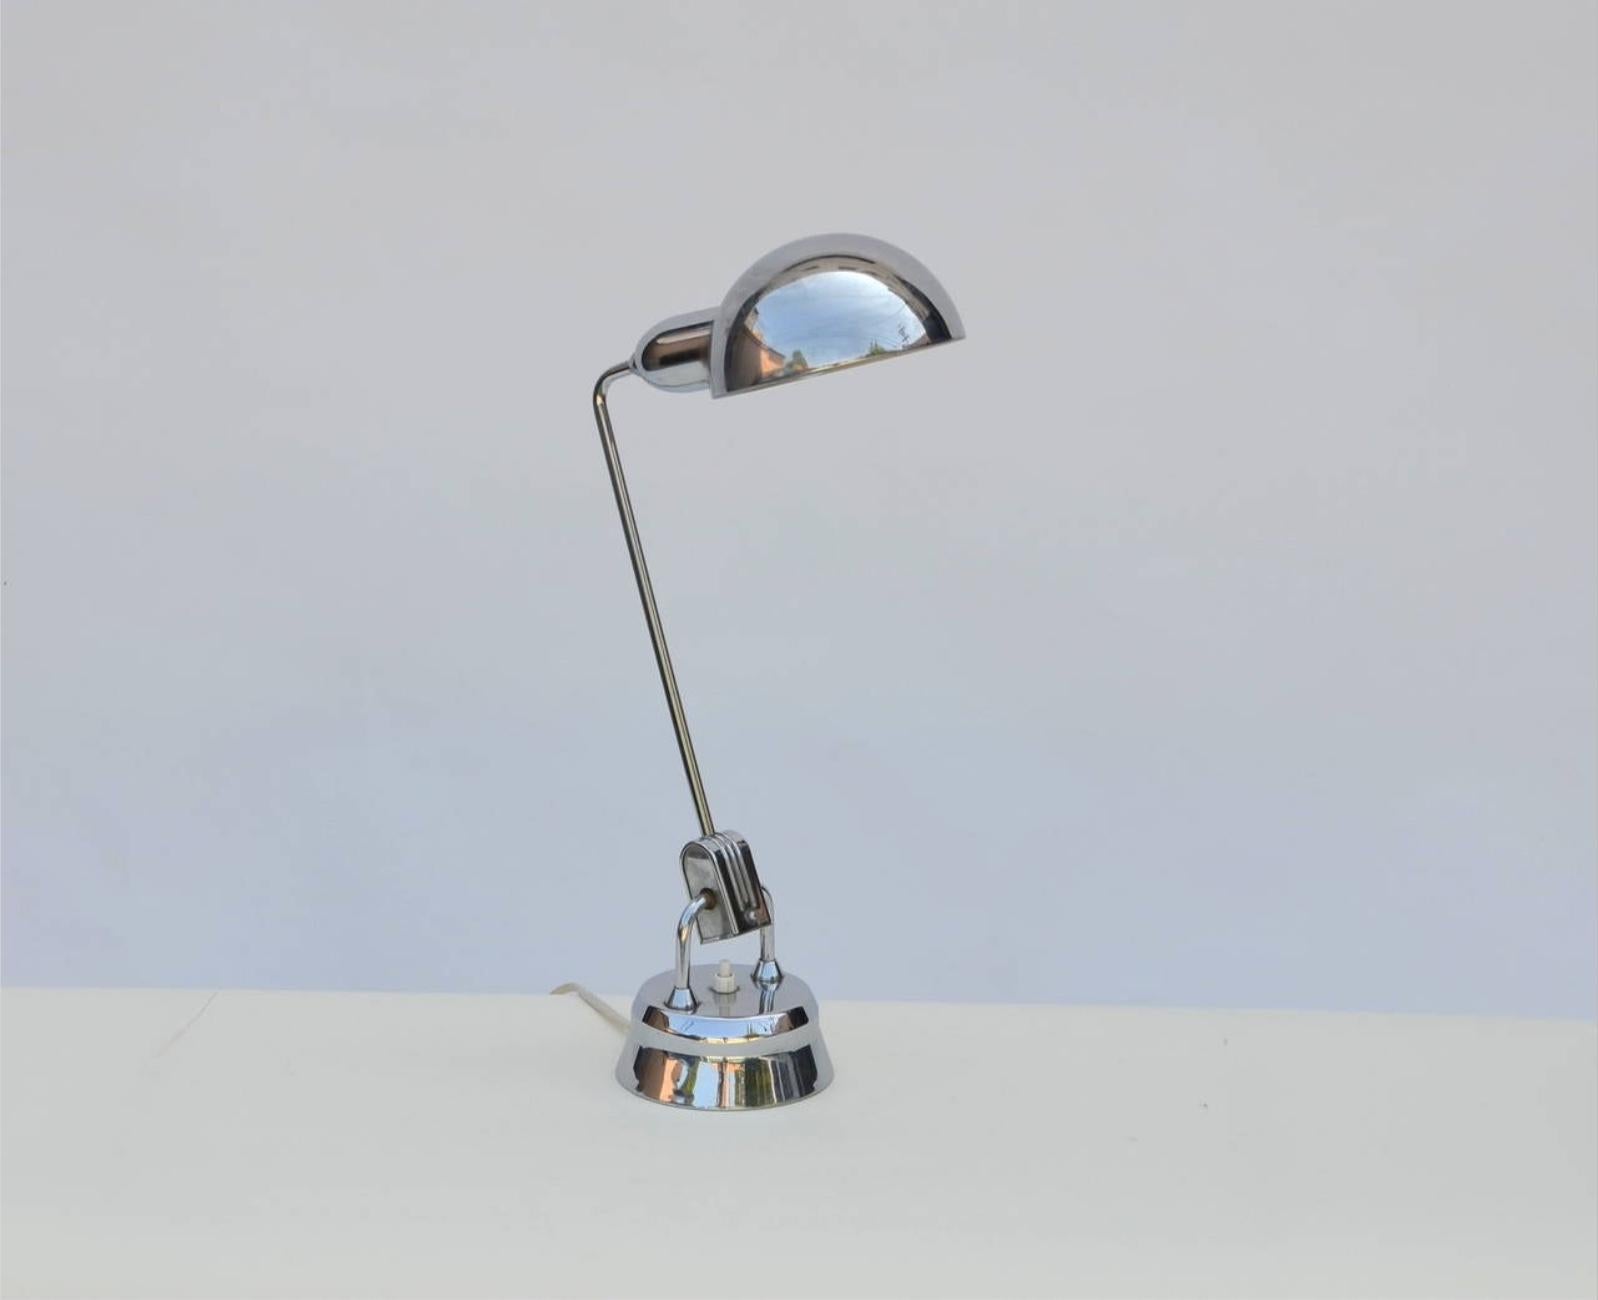 Original Jumo 600 chrome lamp selected by Charlotte Perriand. This lamp was designed by Yves JUjeau, Pierre and Andre MOunique in the 1940s and selected by Charlotte Perriand for some of her projects.